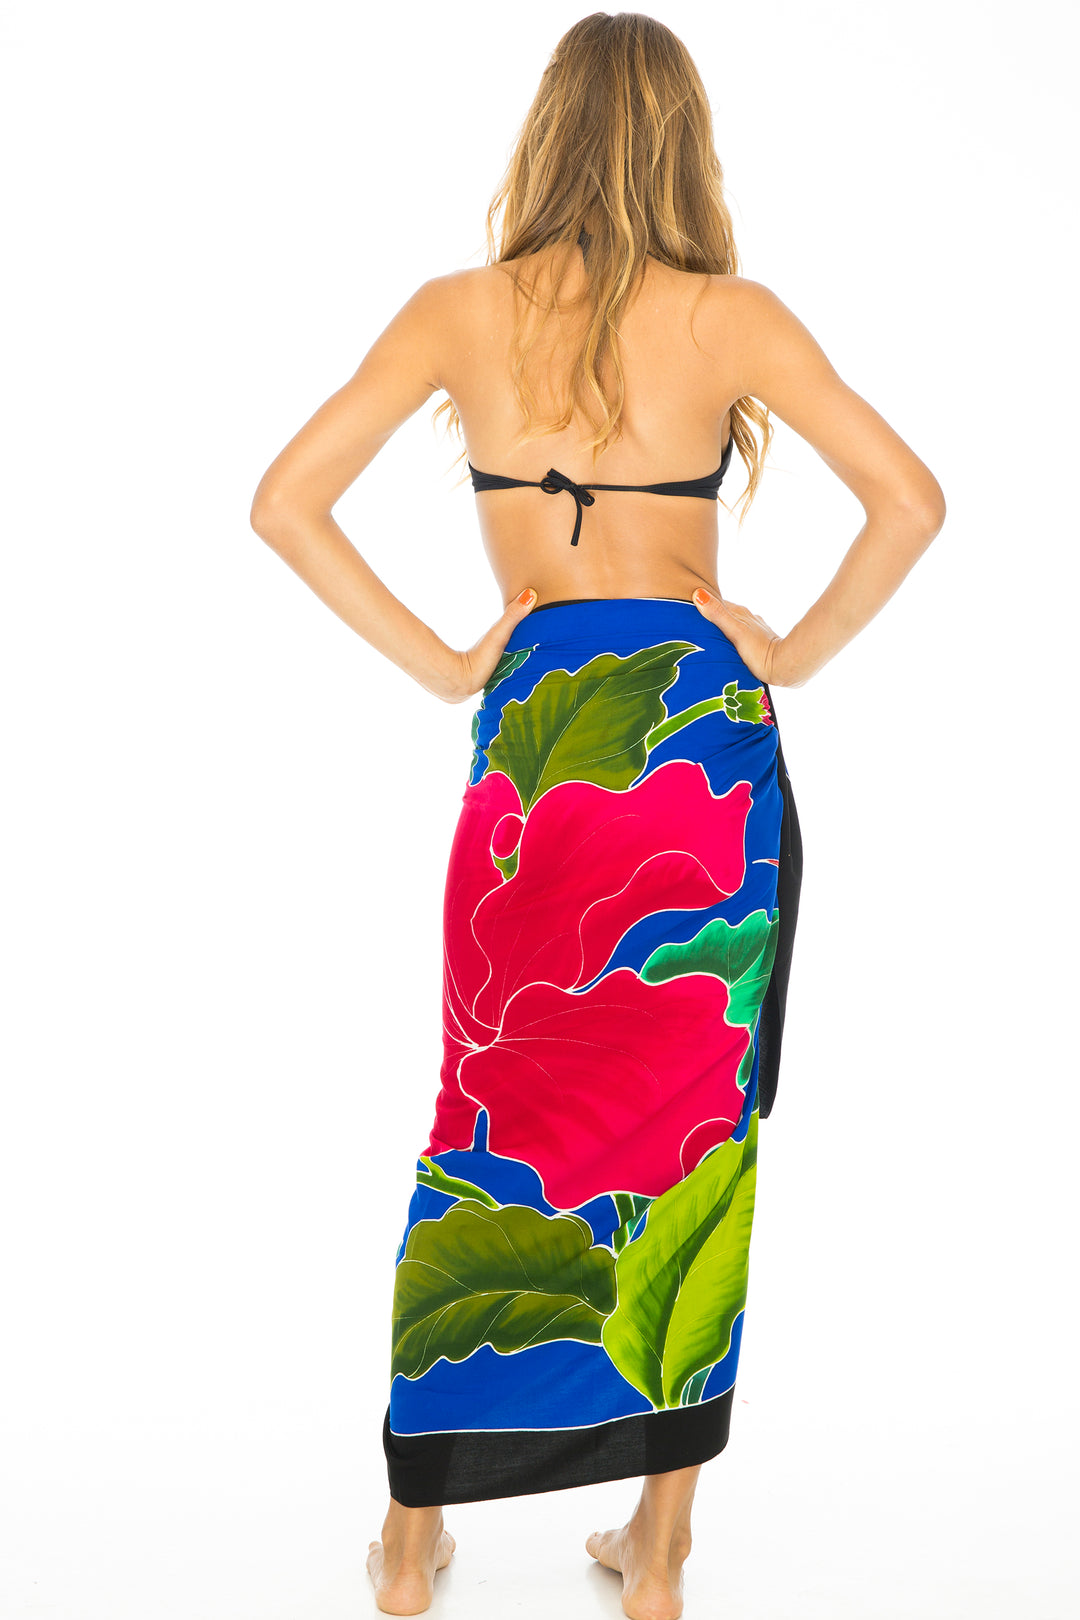 Hand Painted Pareo Sarong Wrap with Coconut Clip